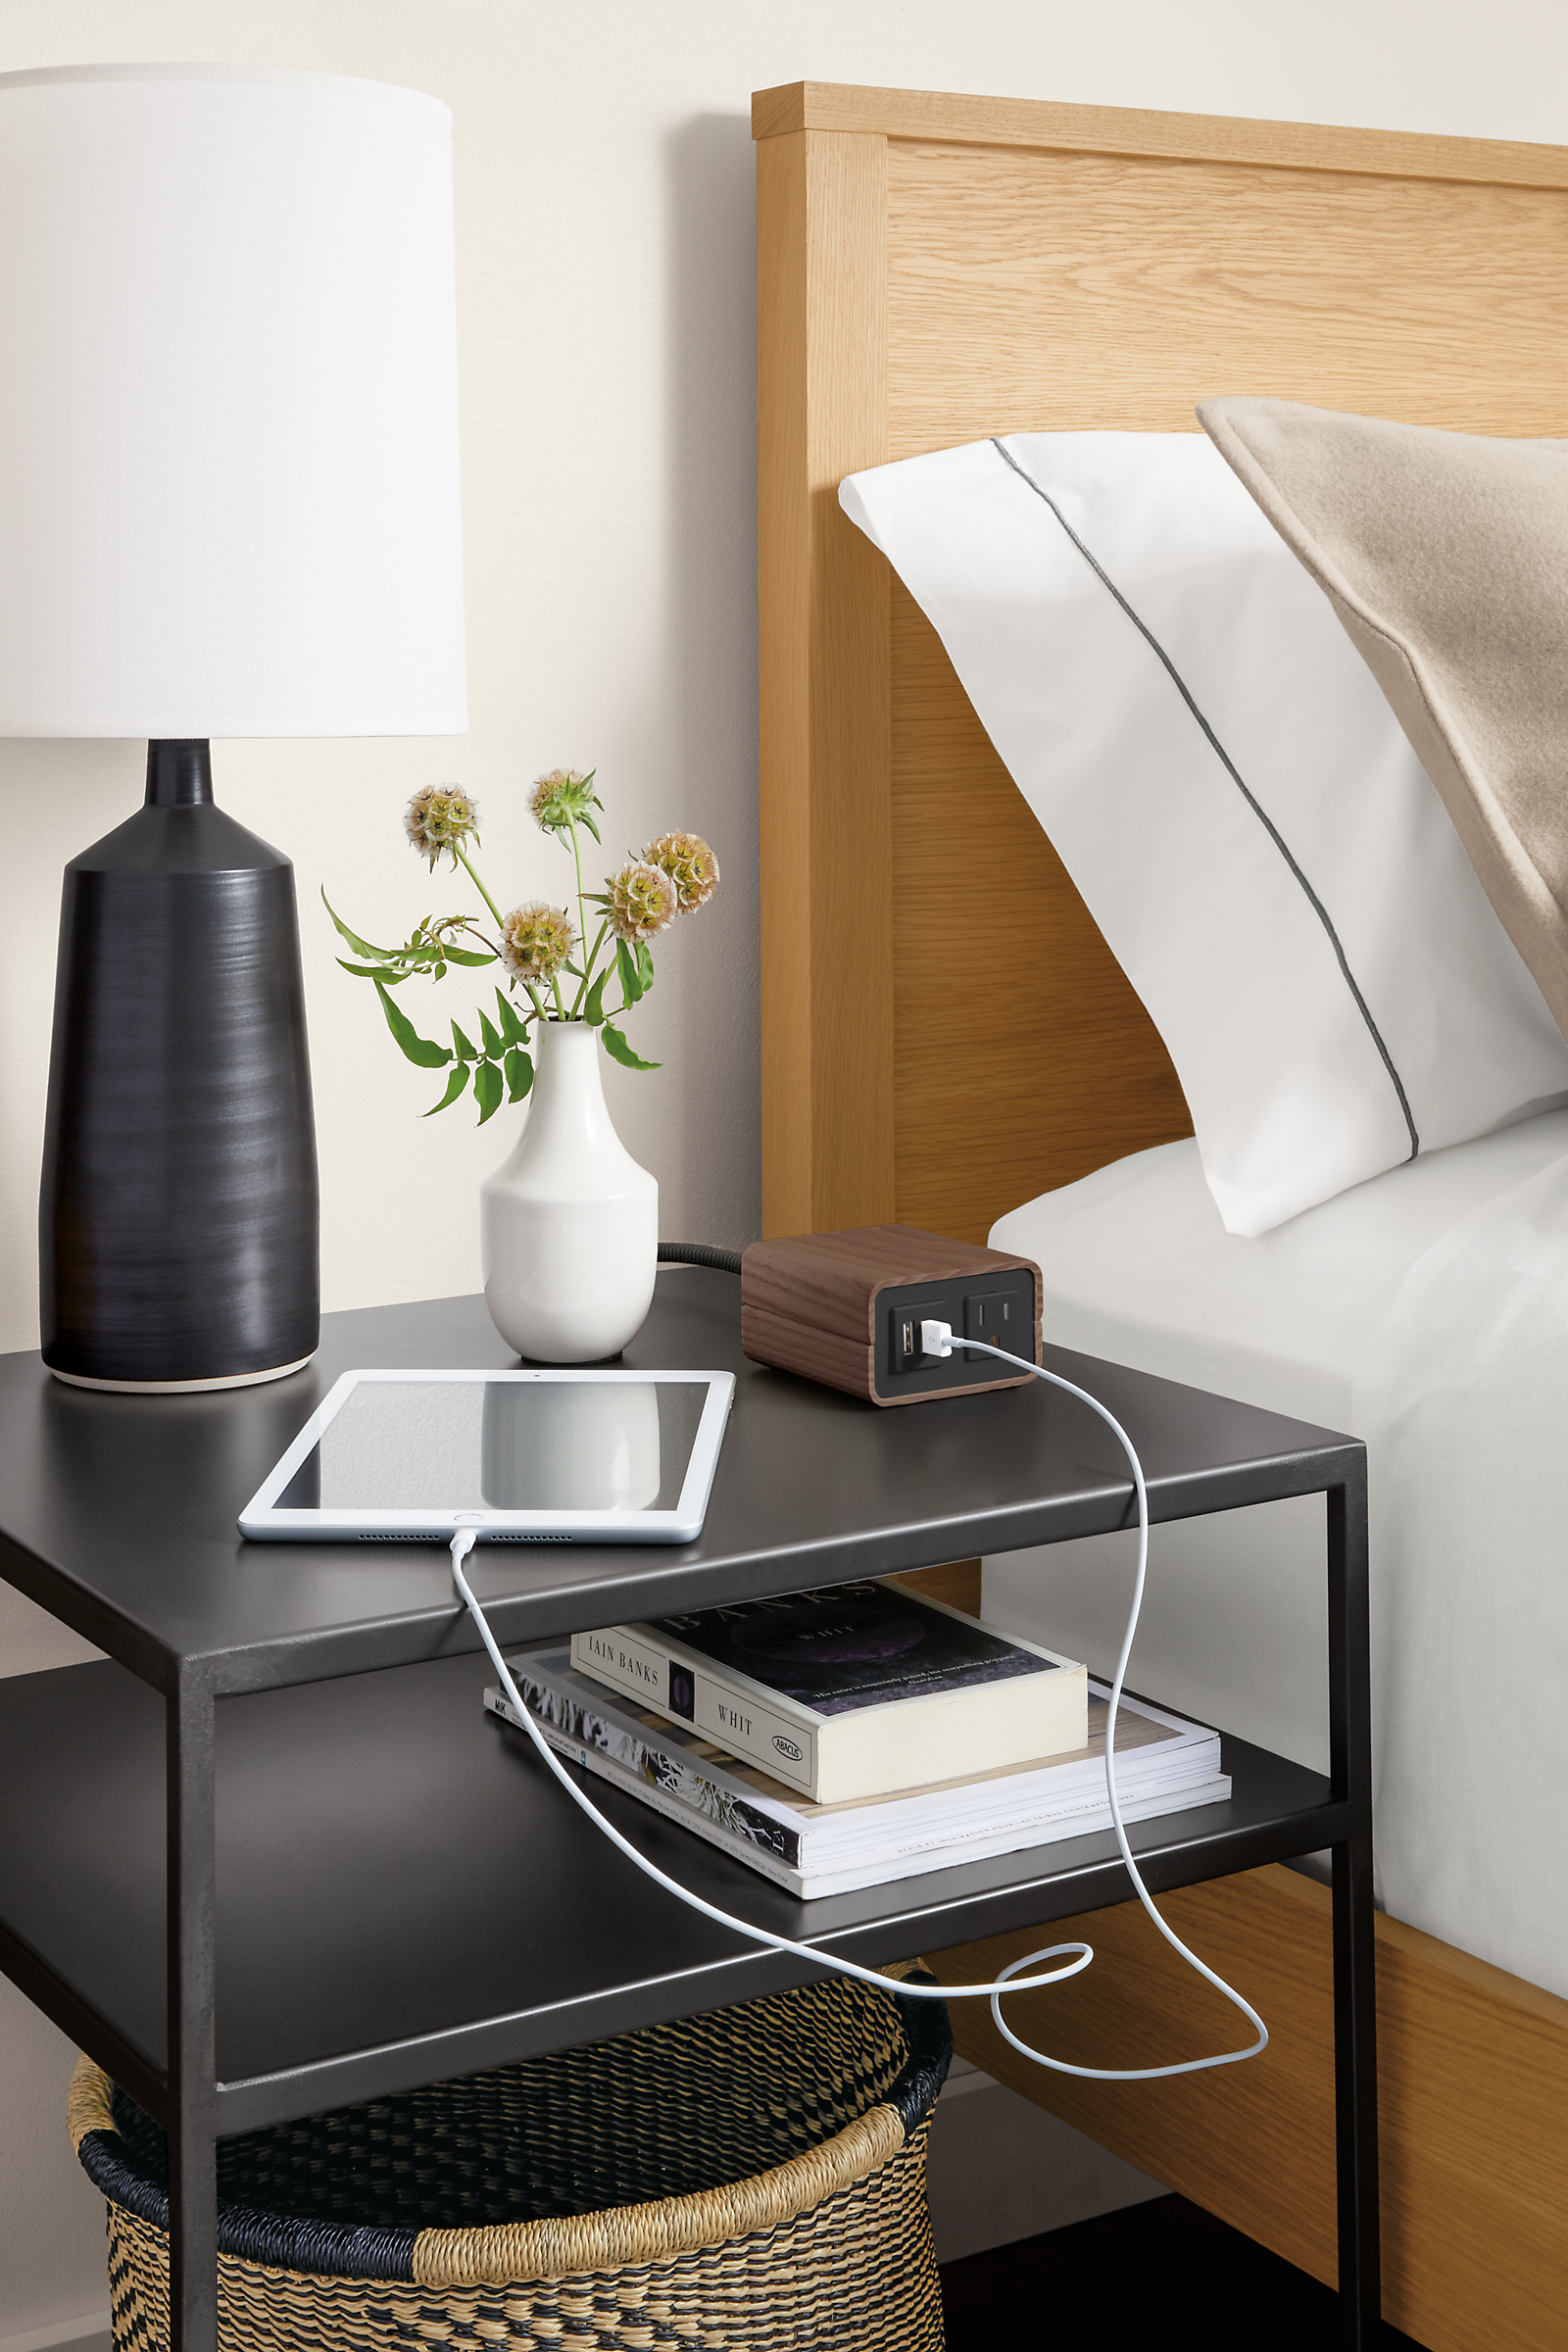 detail of emerson queen bed, slim end table, willow tabletop charger, monarch table lamp.